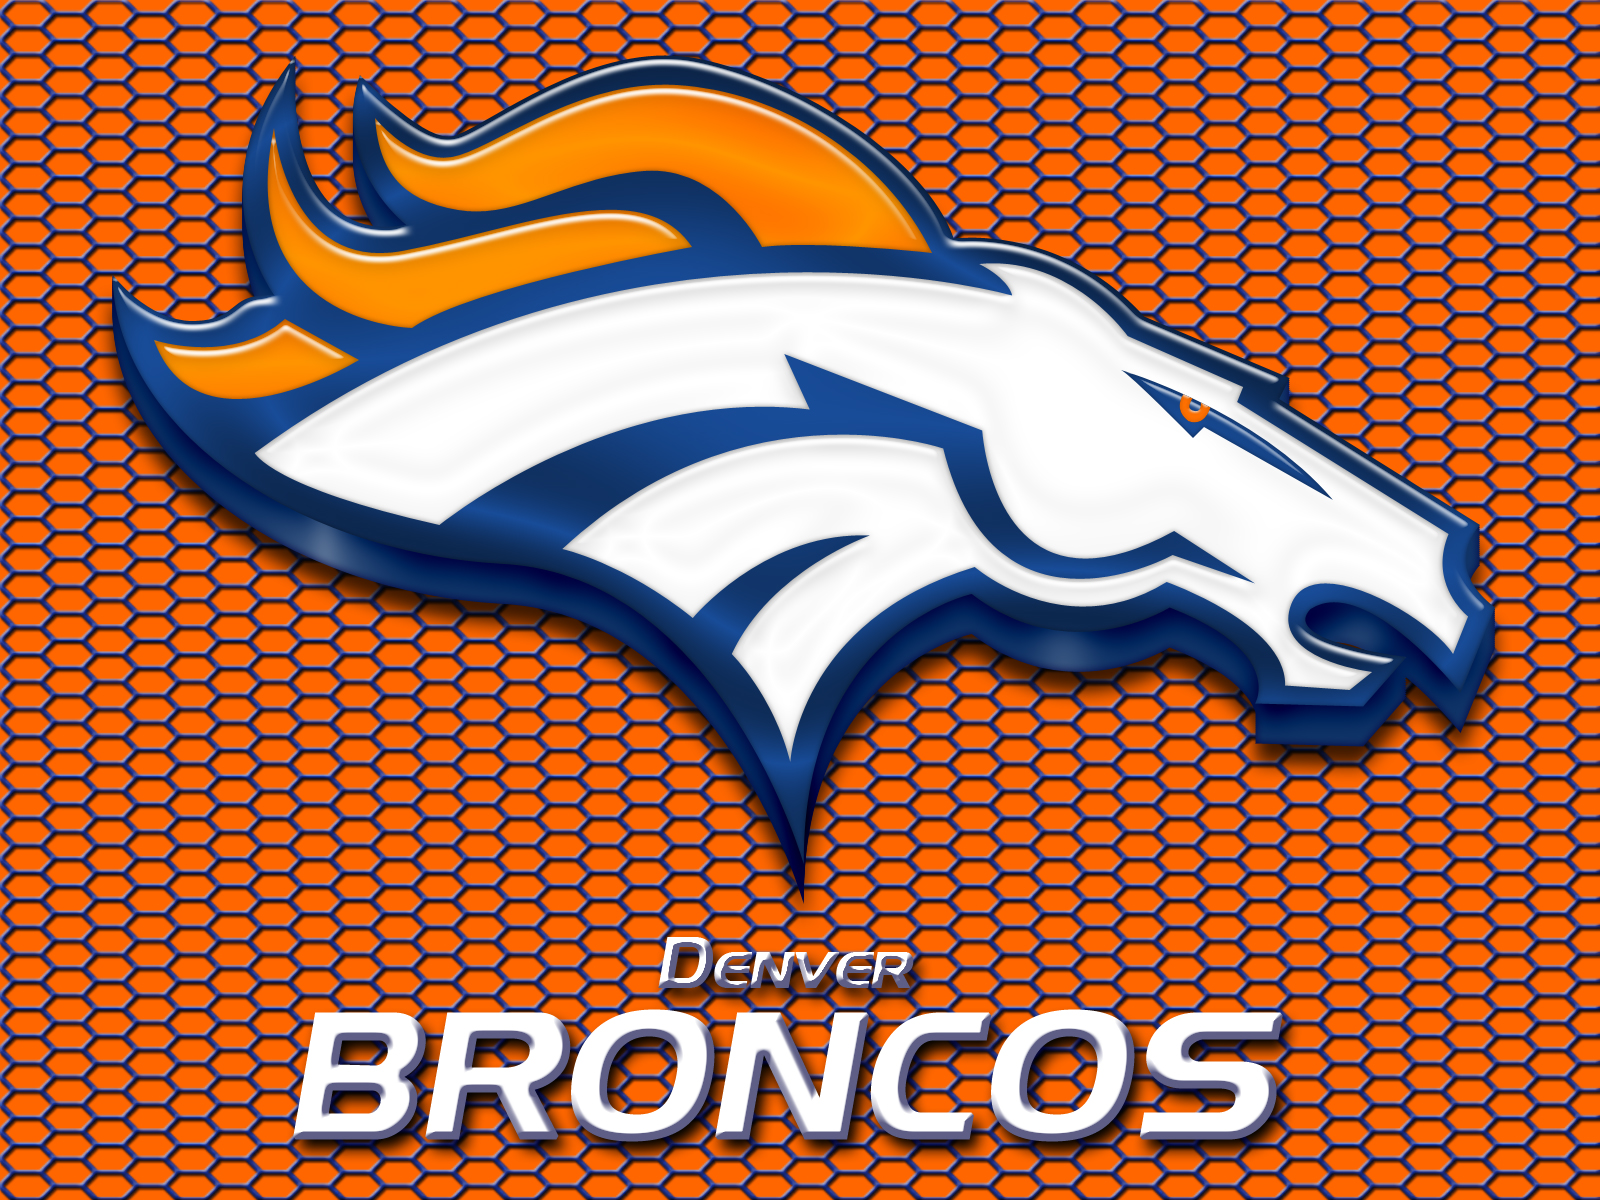 Hope You Like This Denver Broncos Wallpaper Background In High